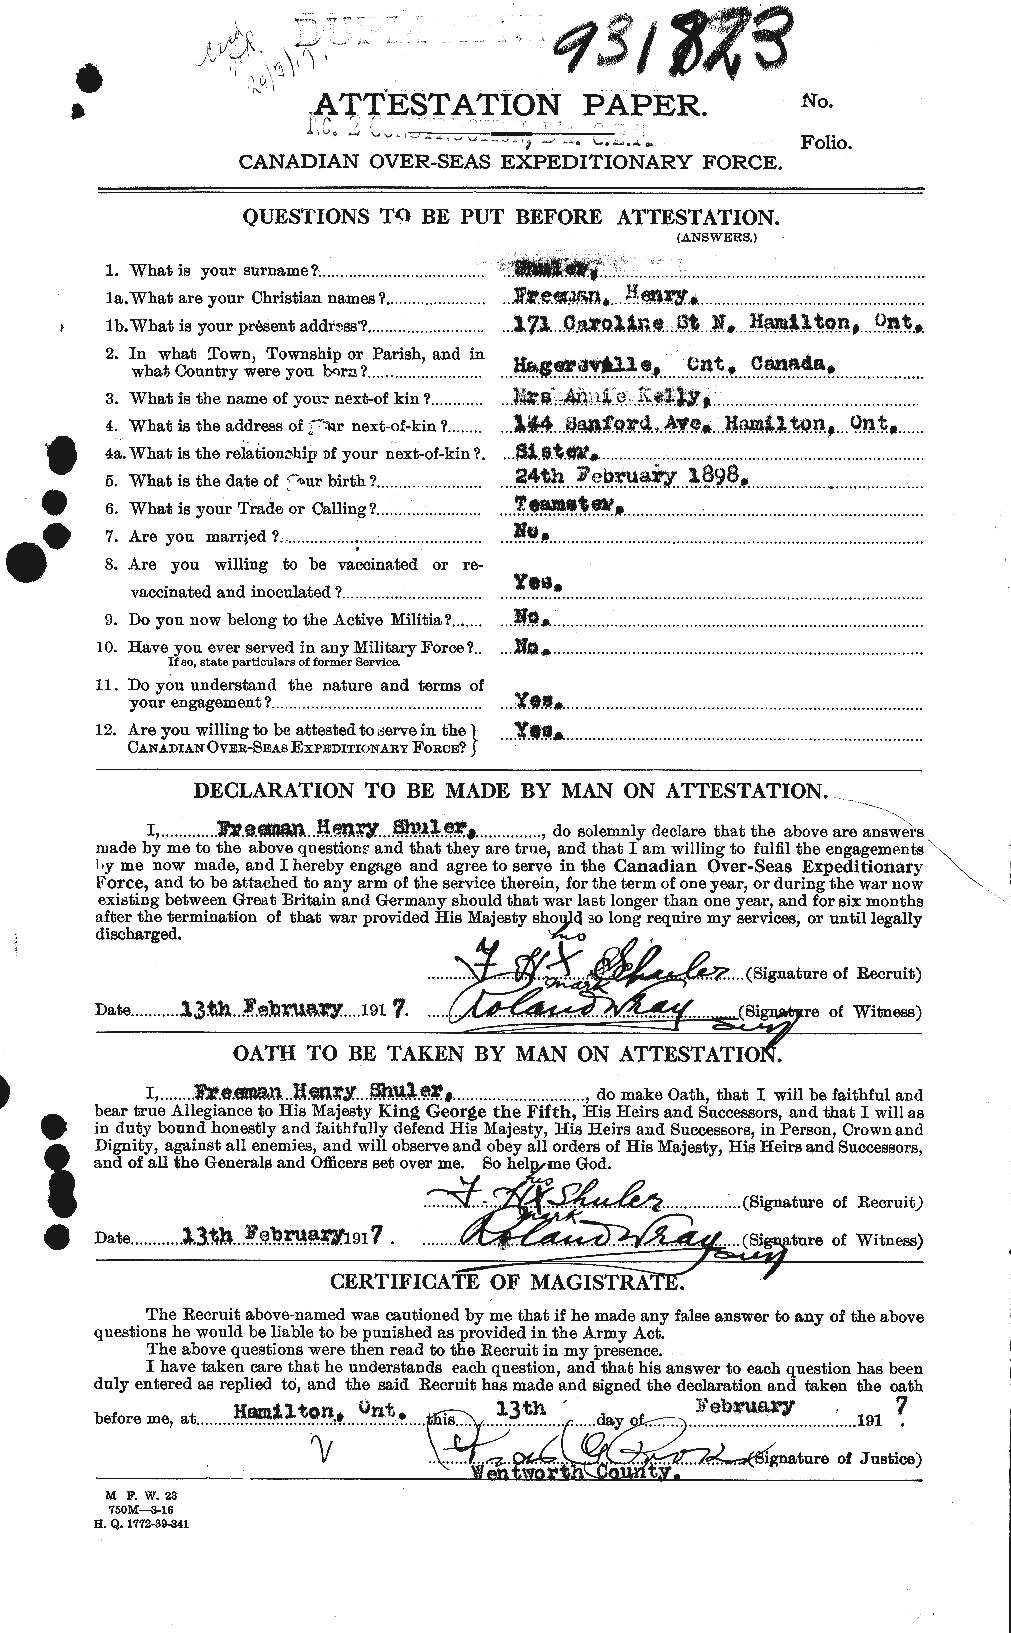 Personnel Records of the First World War - CEF 097293a